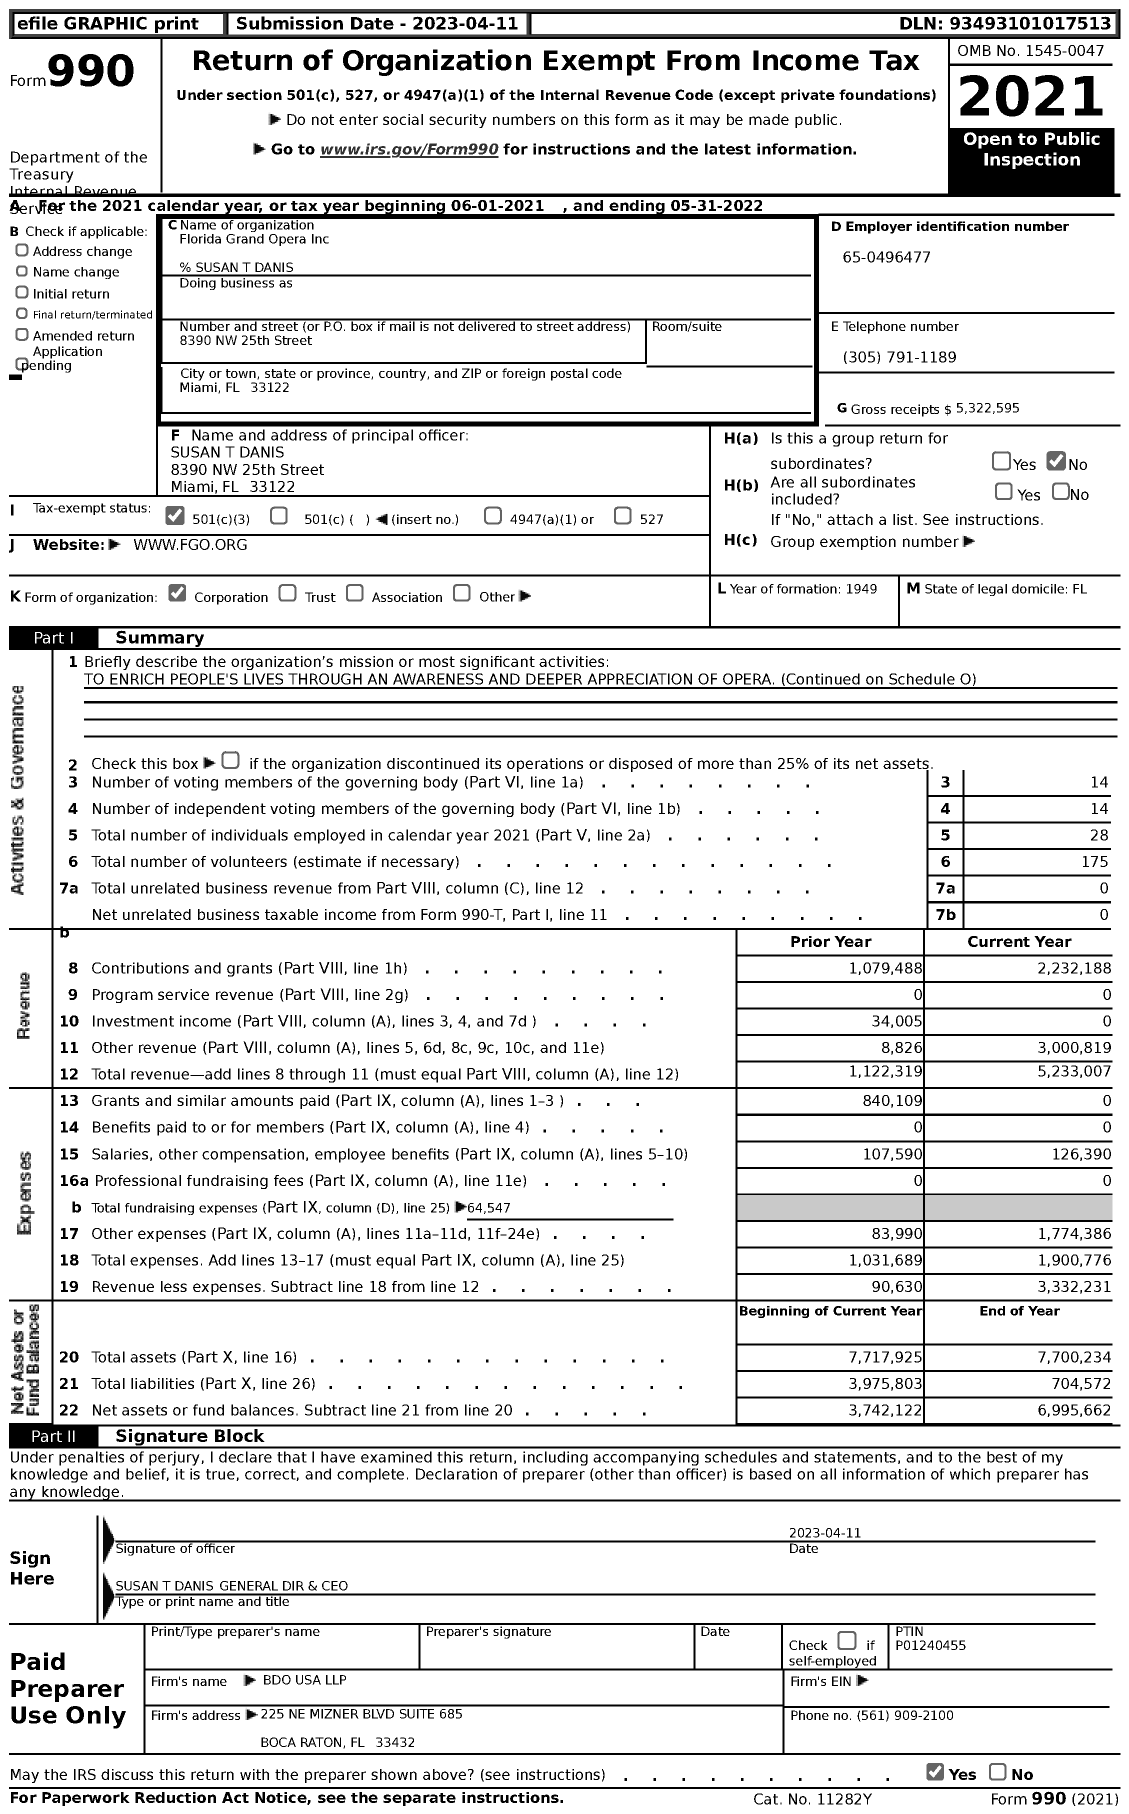 Image of first page of 2021 Form 990 for Florida Grand Opera (FGO)